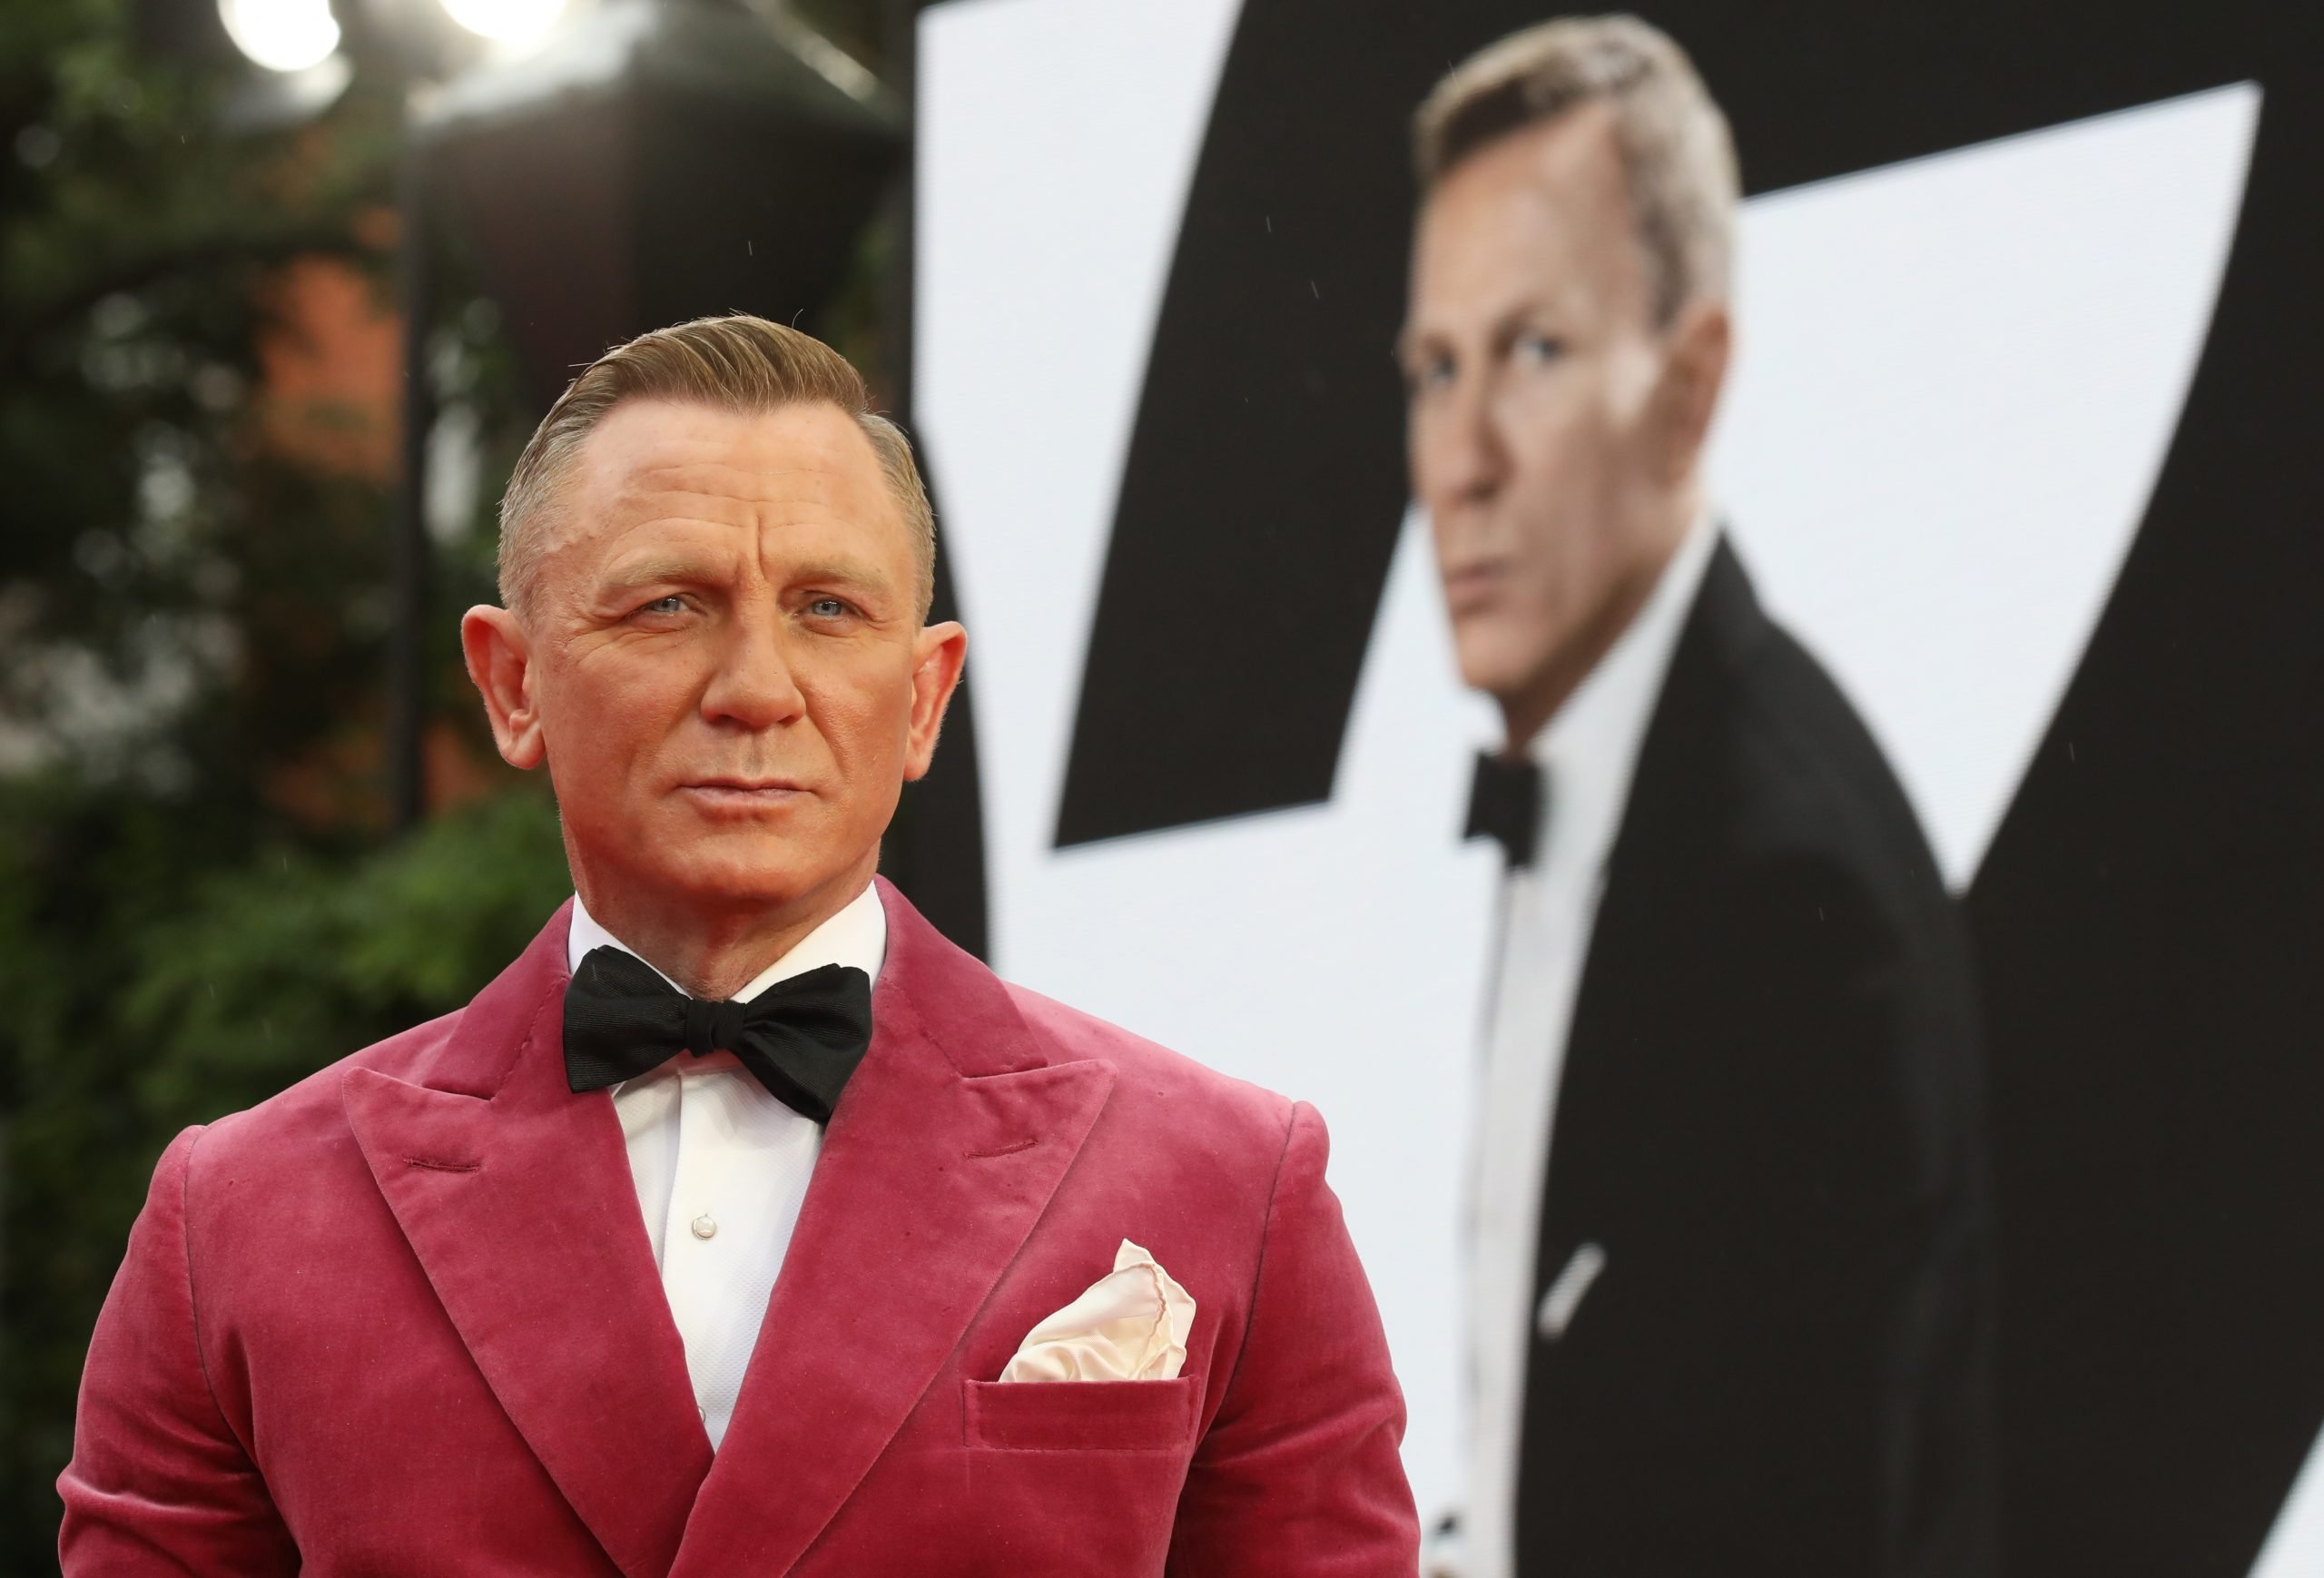 Producer Says Finding Next James Bond Actor Will Take Some Time, Here are 3 Possible Candidates